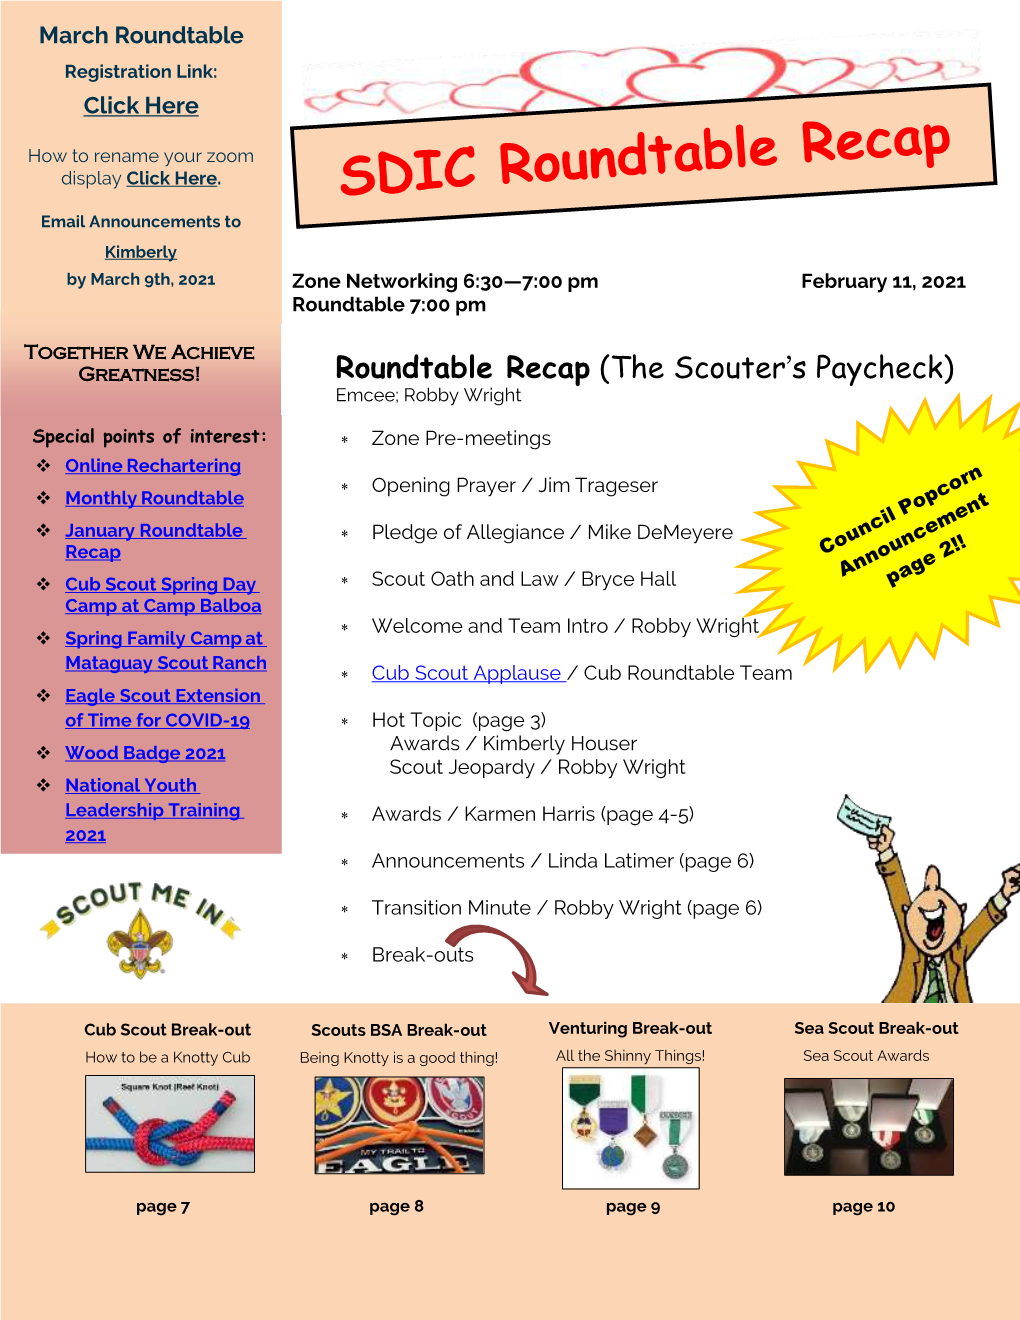 Roundtable Recap (The Scouter's Paycheck)